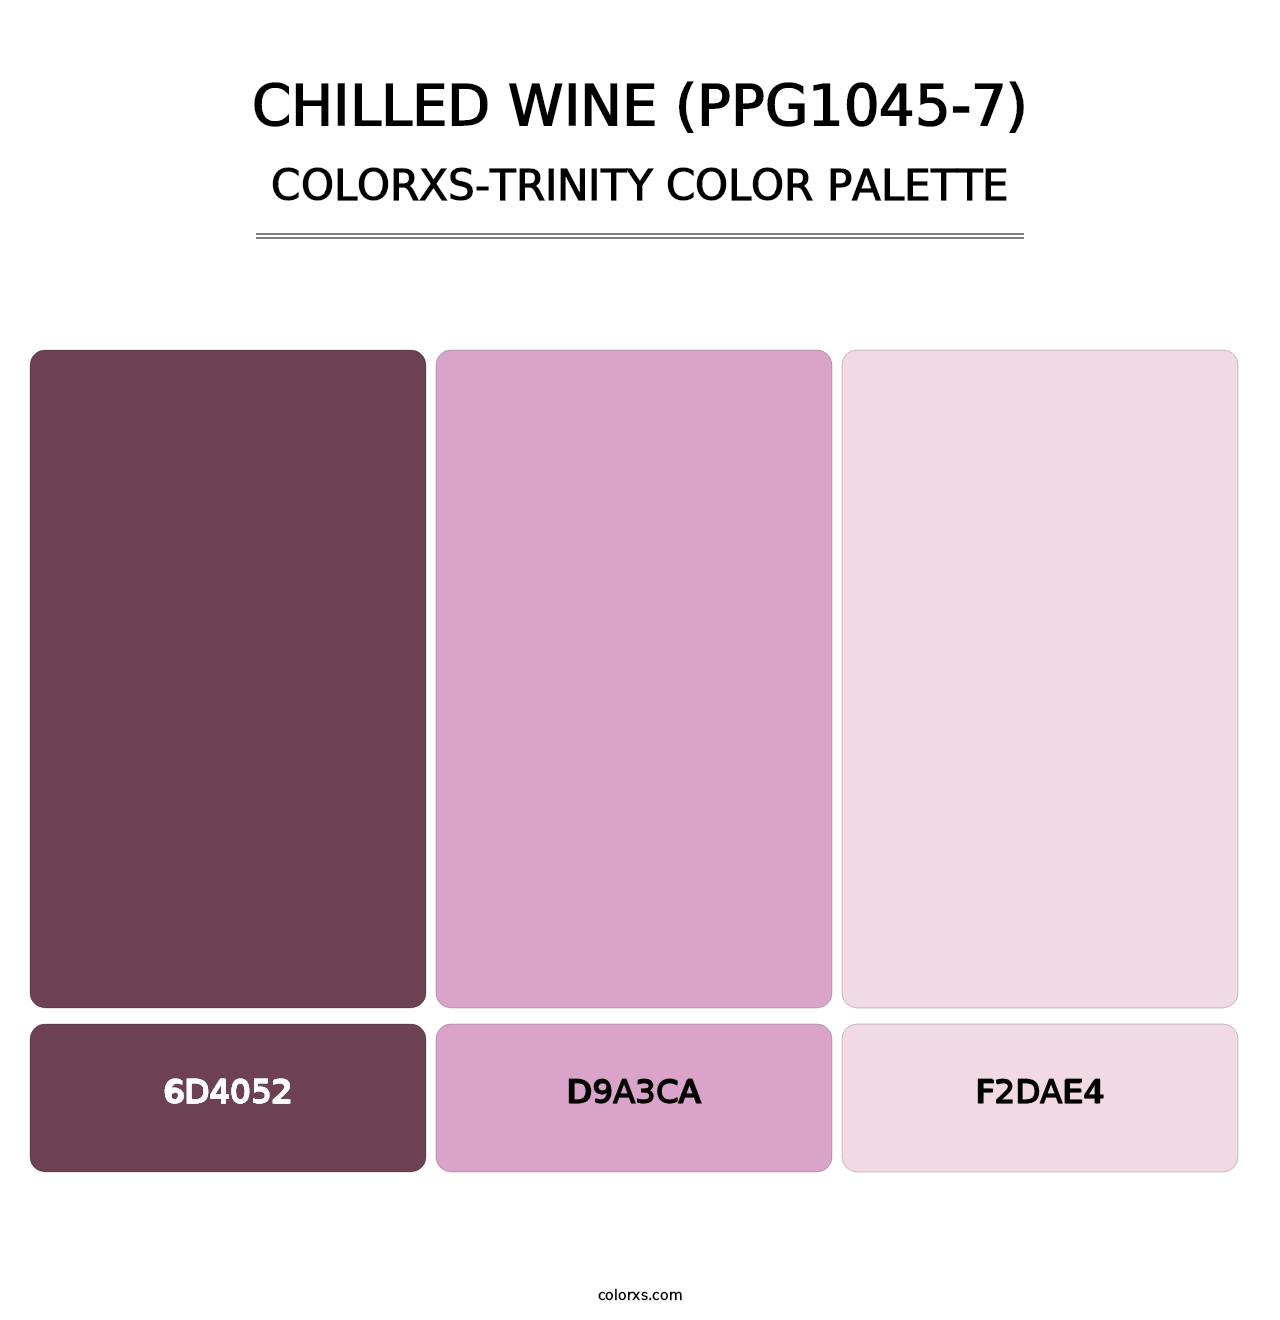 Chilled Wine (PPG1045-7) - Colorxs Trinity Palette